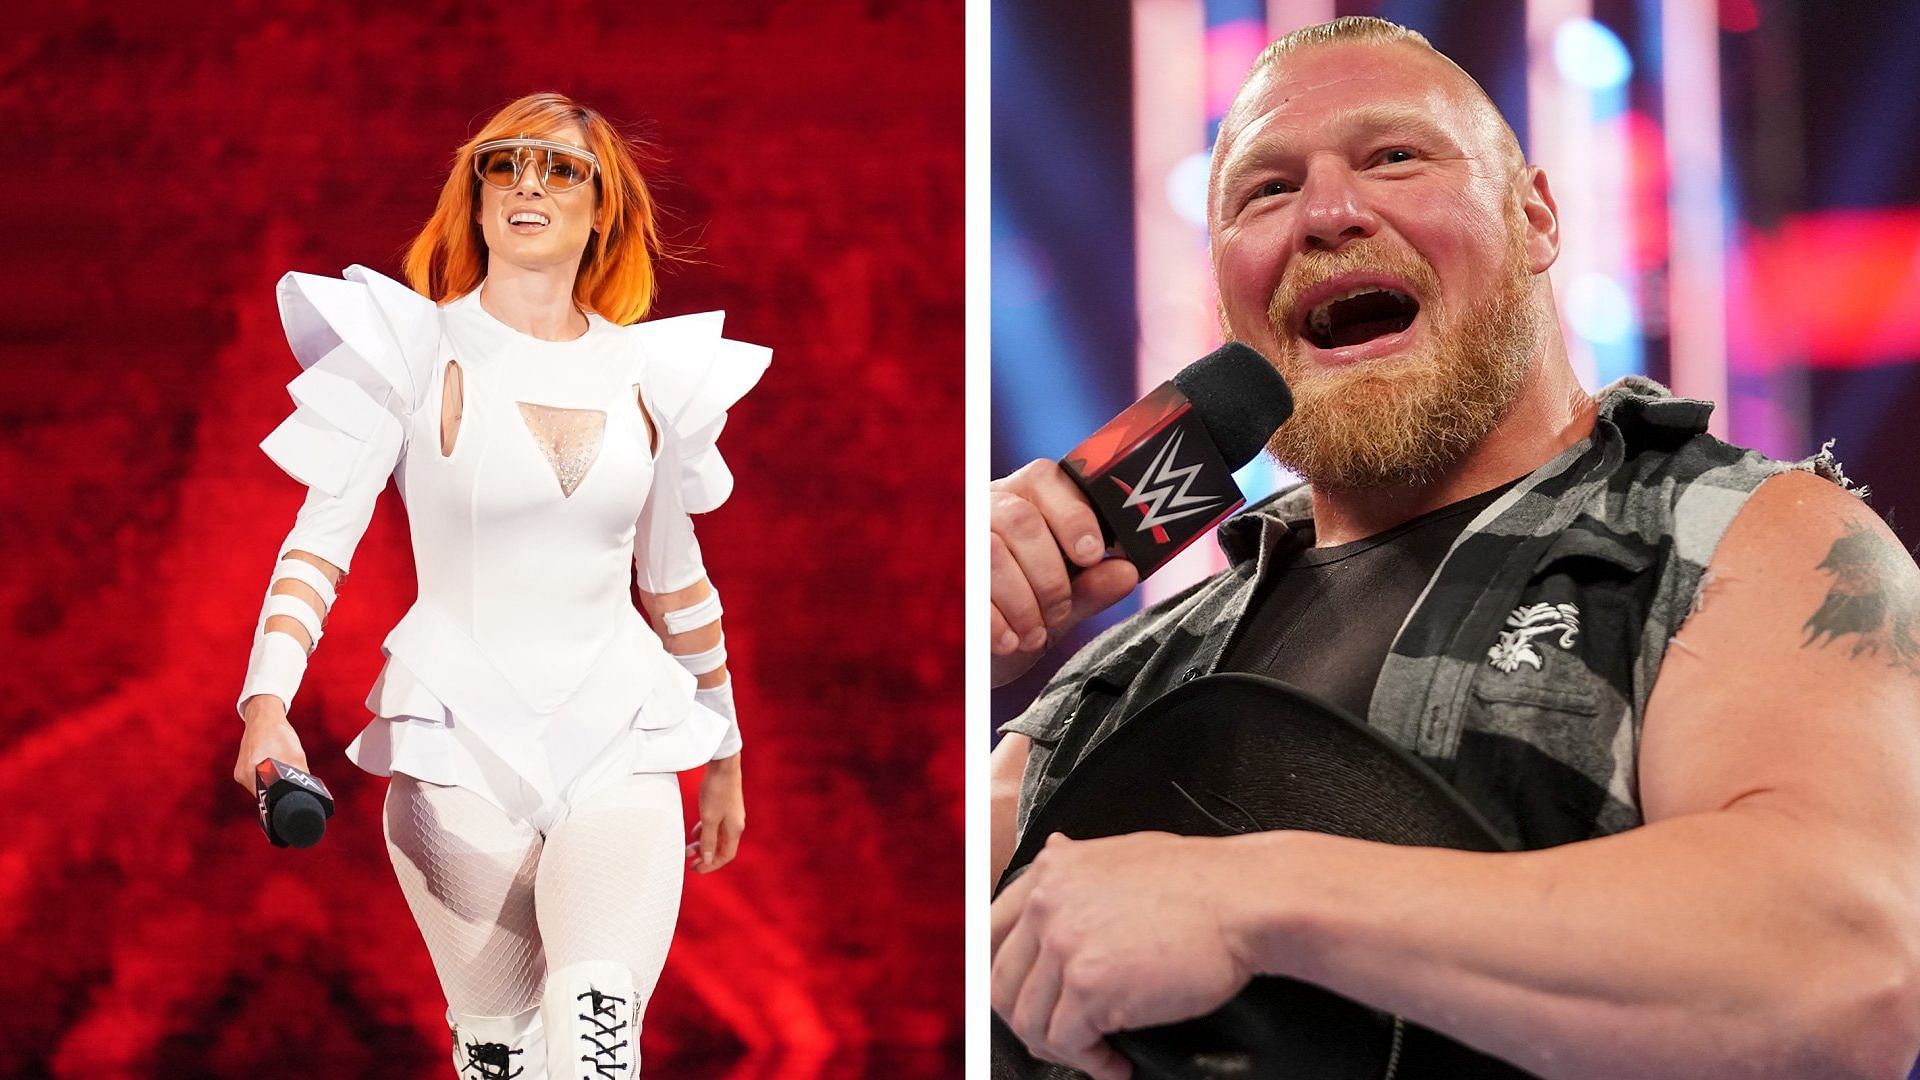 New series debuting, WWE SummerSlam, and more 11 shows coming to WWE